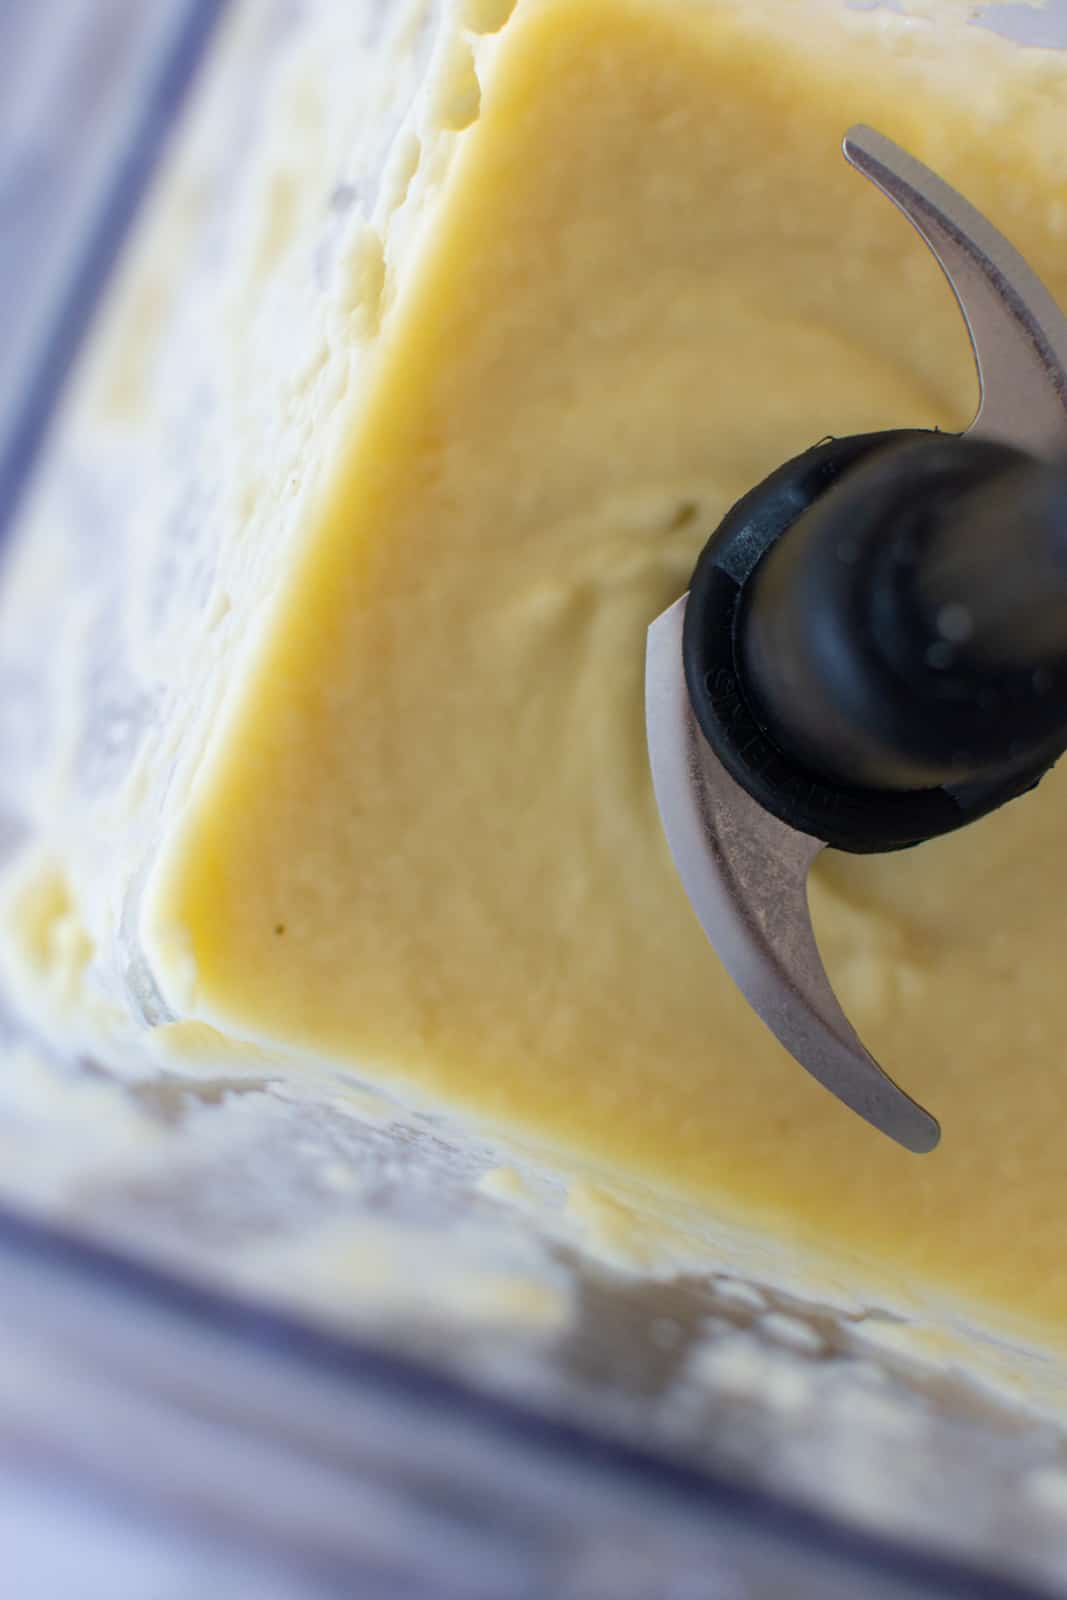 sikly cauliflower puree in a blender